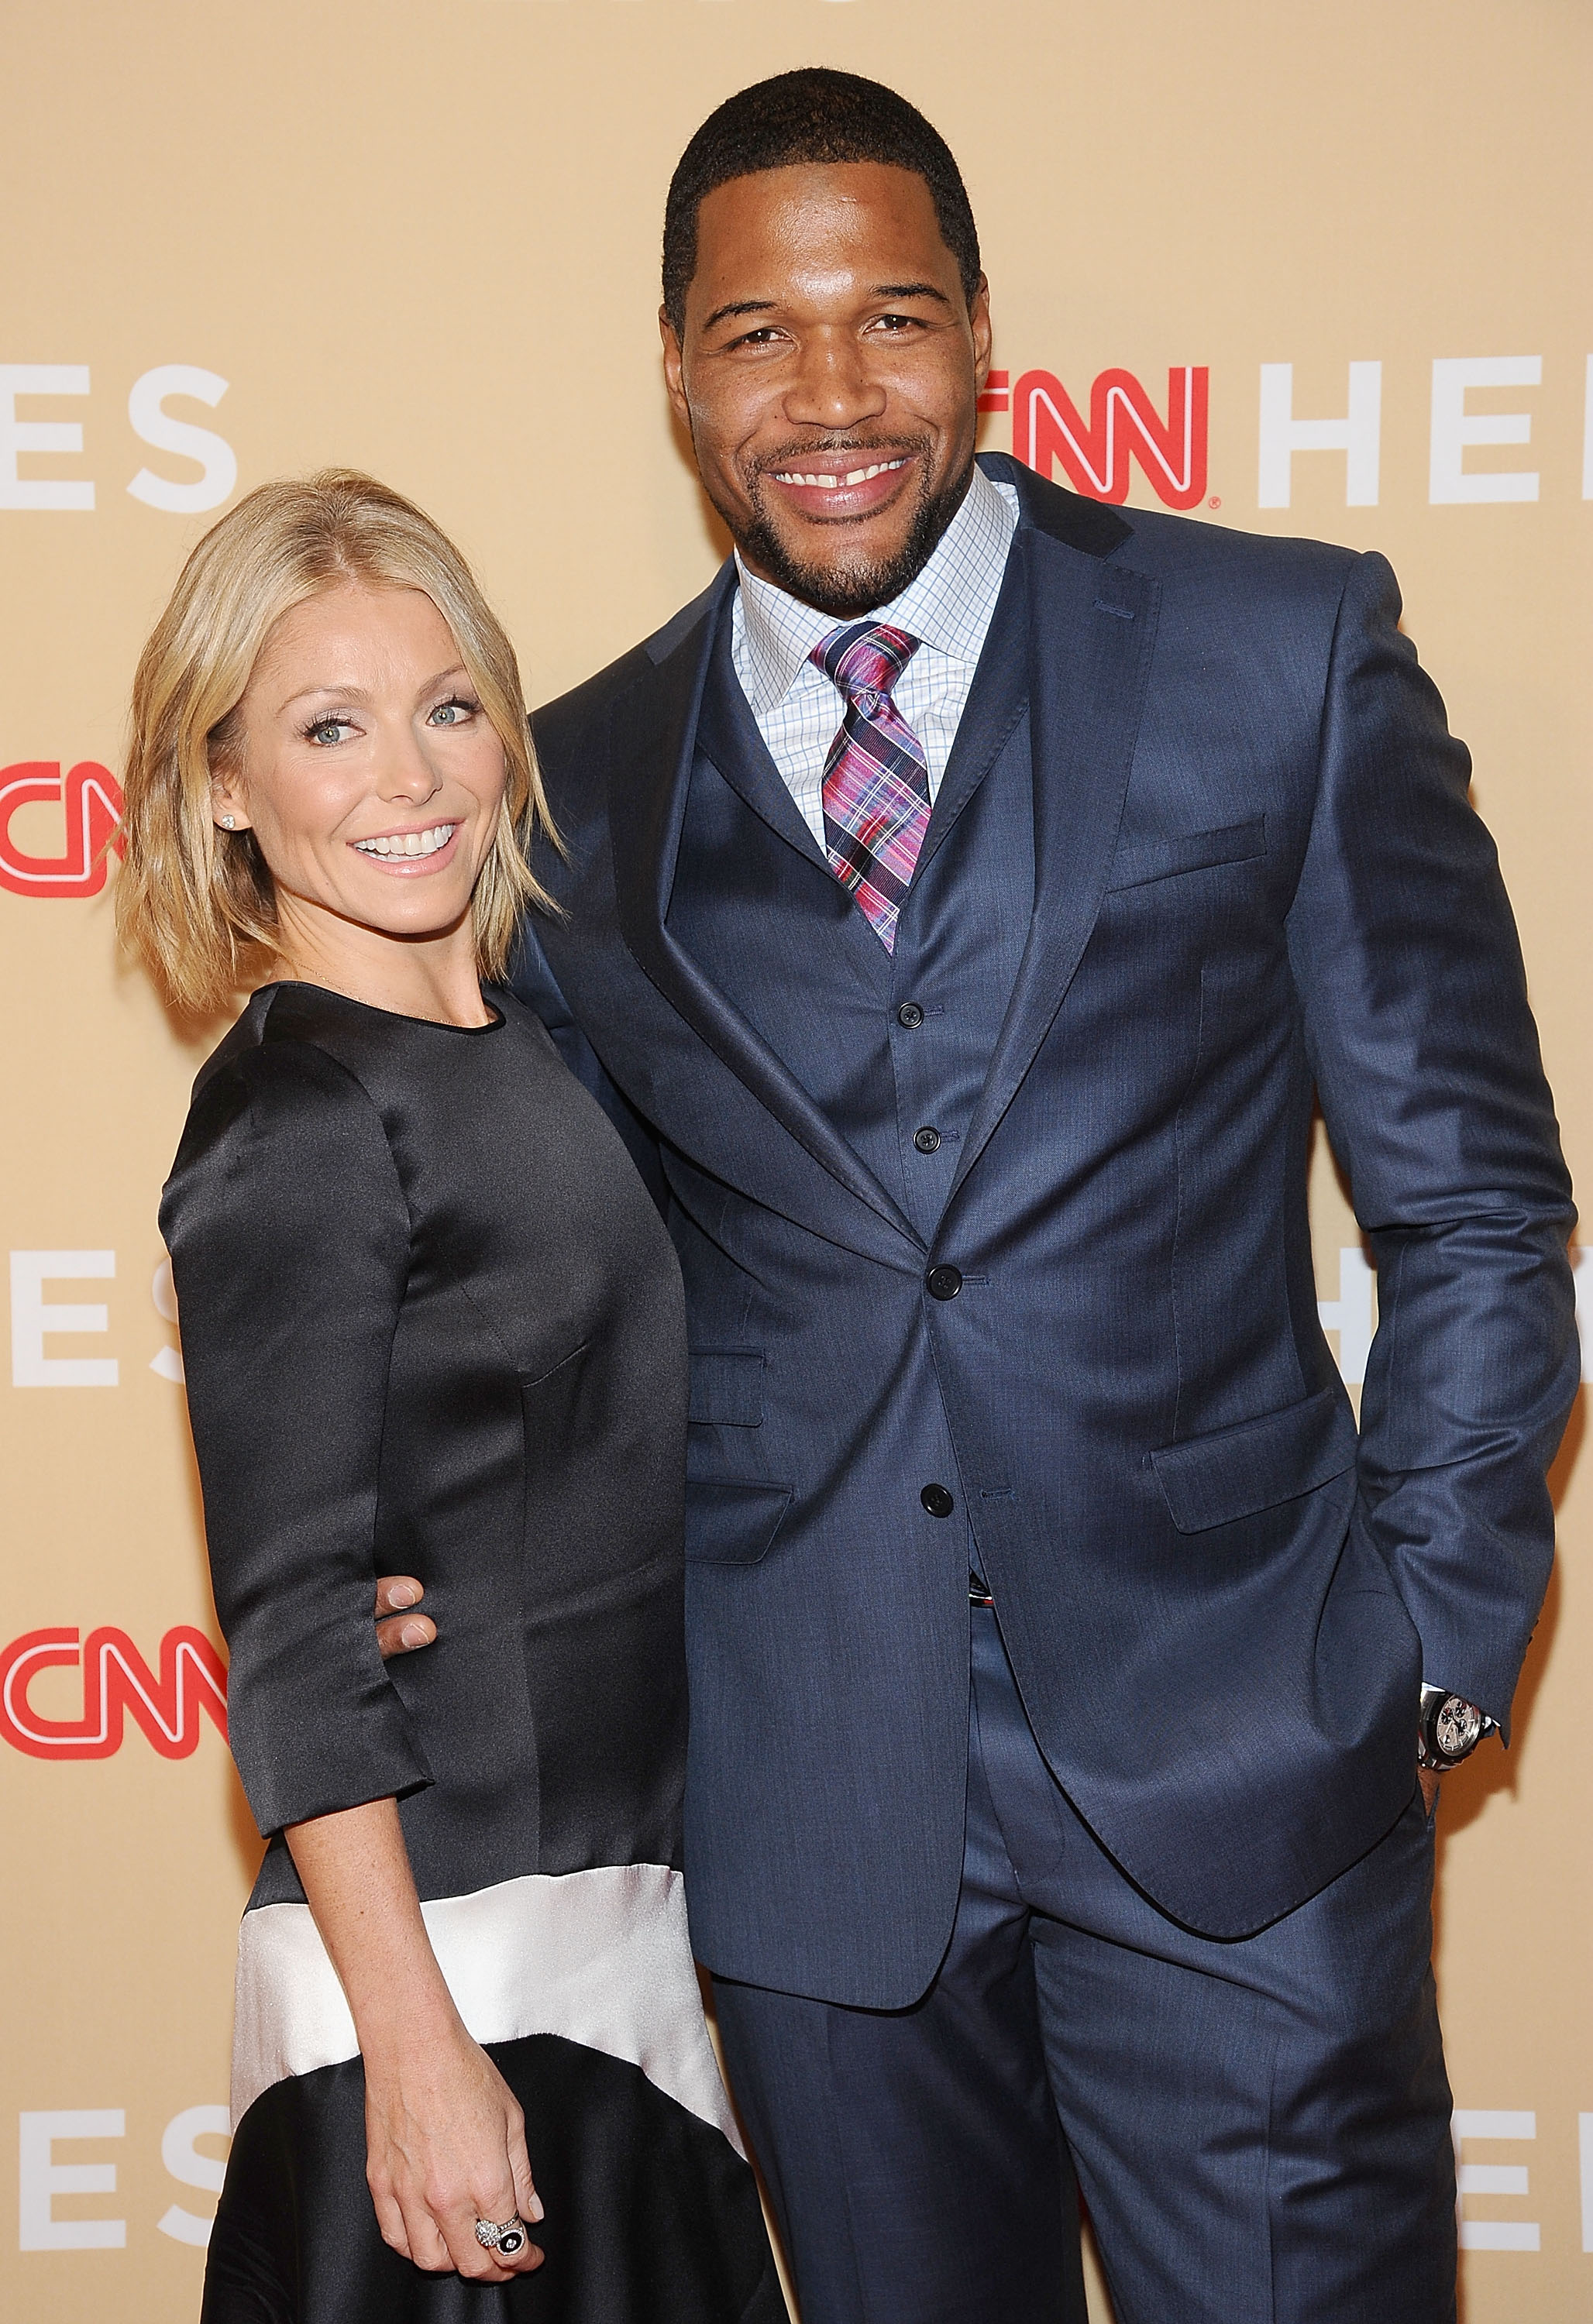 Kelly Ripa And Michael Strahan Accidentally Give Away A Trip On Live